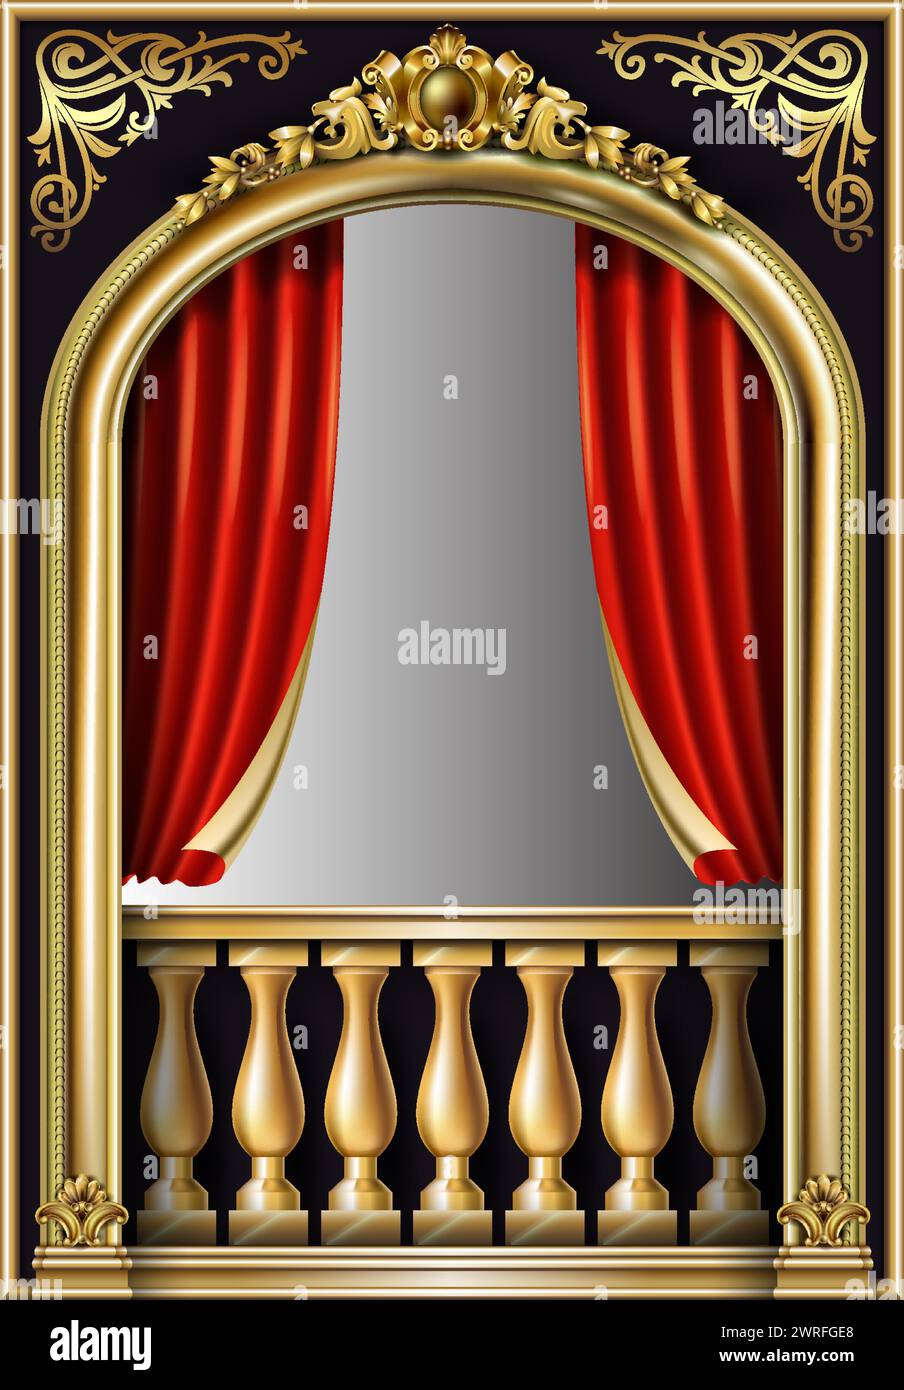 Baroque arched theatrical golden box Stock Vector